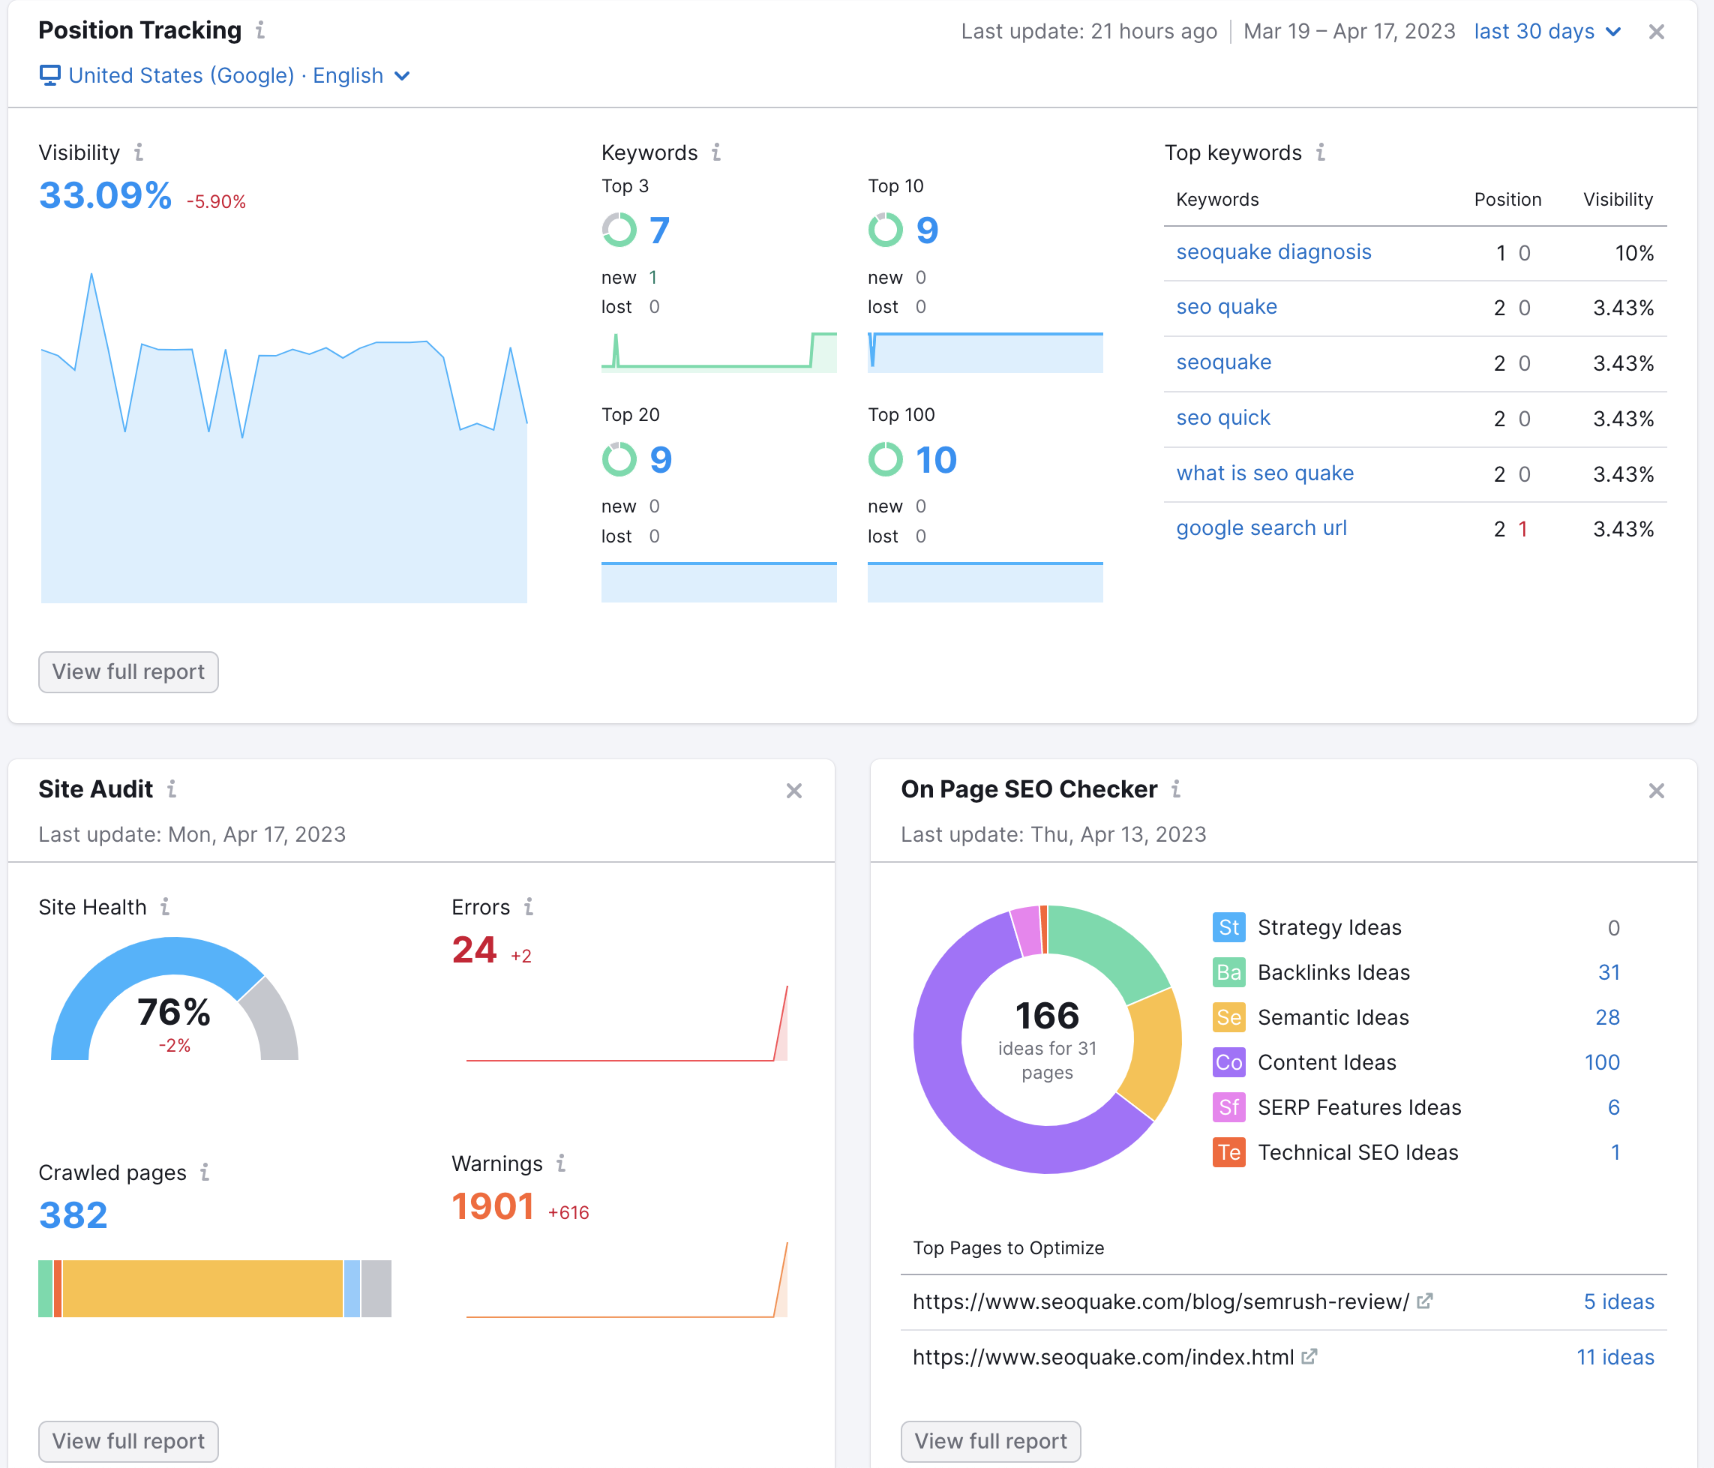 SEO Dashboard with Position Tracking, Site Audit, and On Page SEO Checker widgets